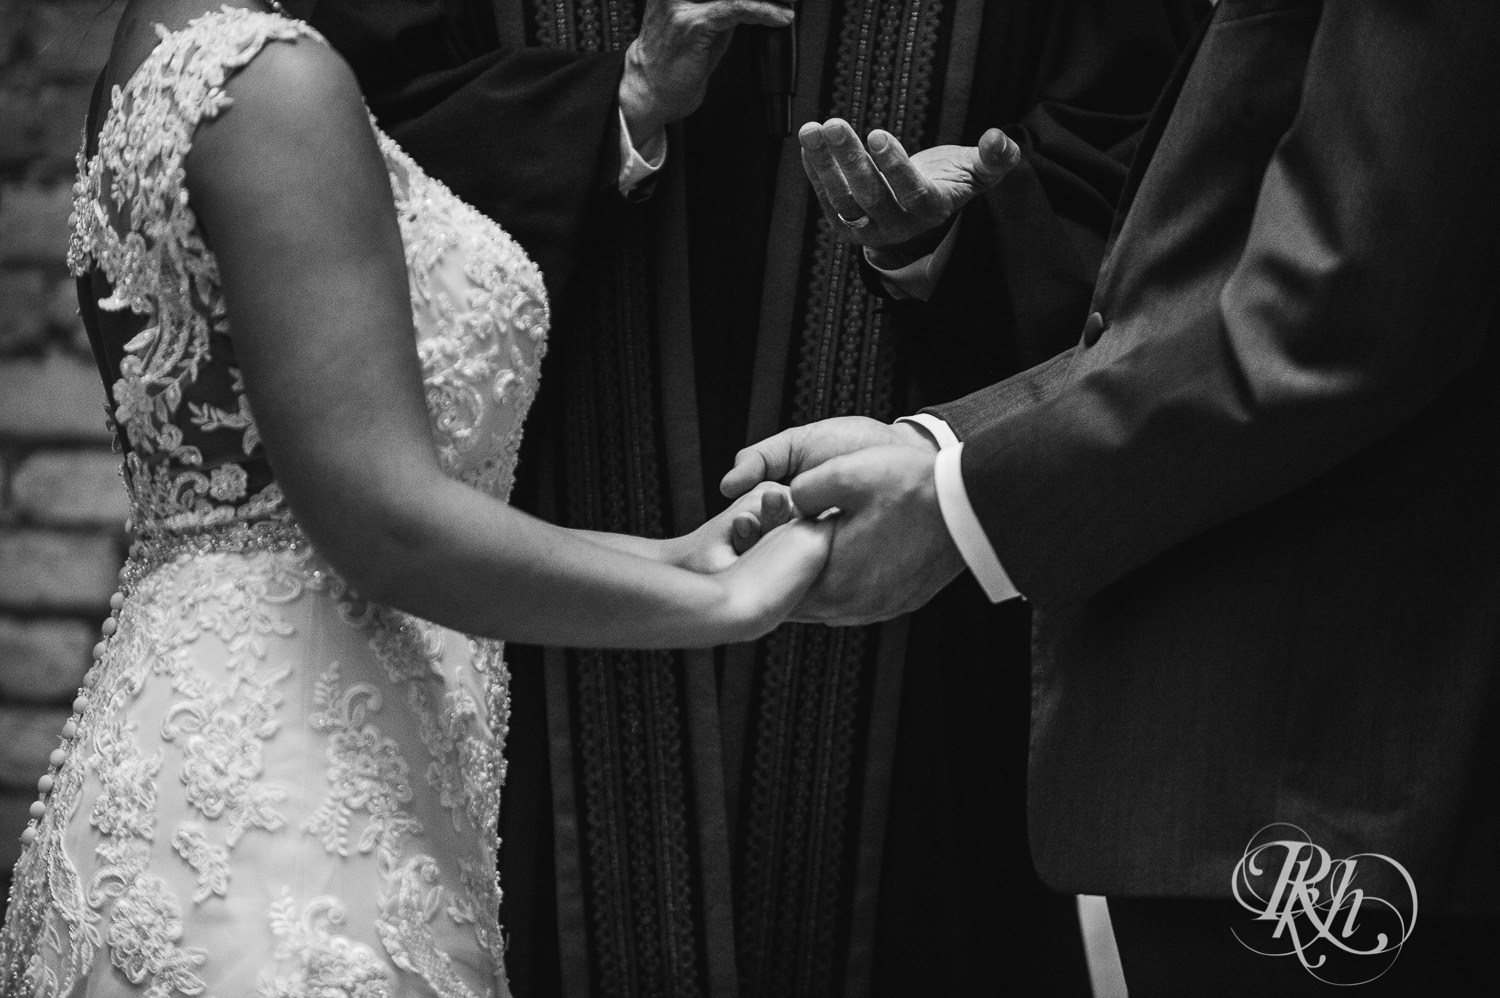 Bride and groom hold hands during wedding ceremony at the Lumber Exchange Event Center in Minneapolis, Minnesota.